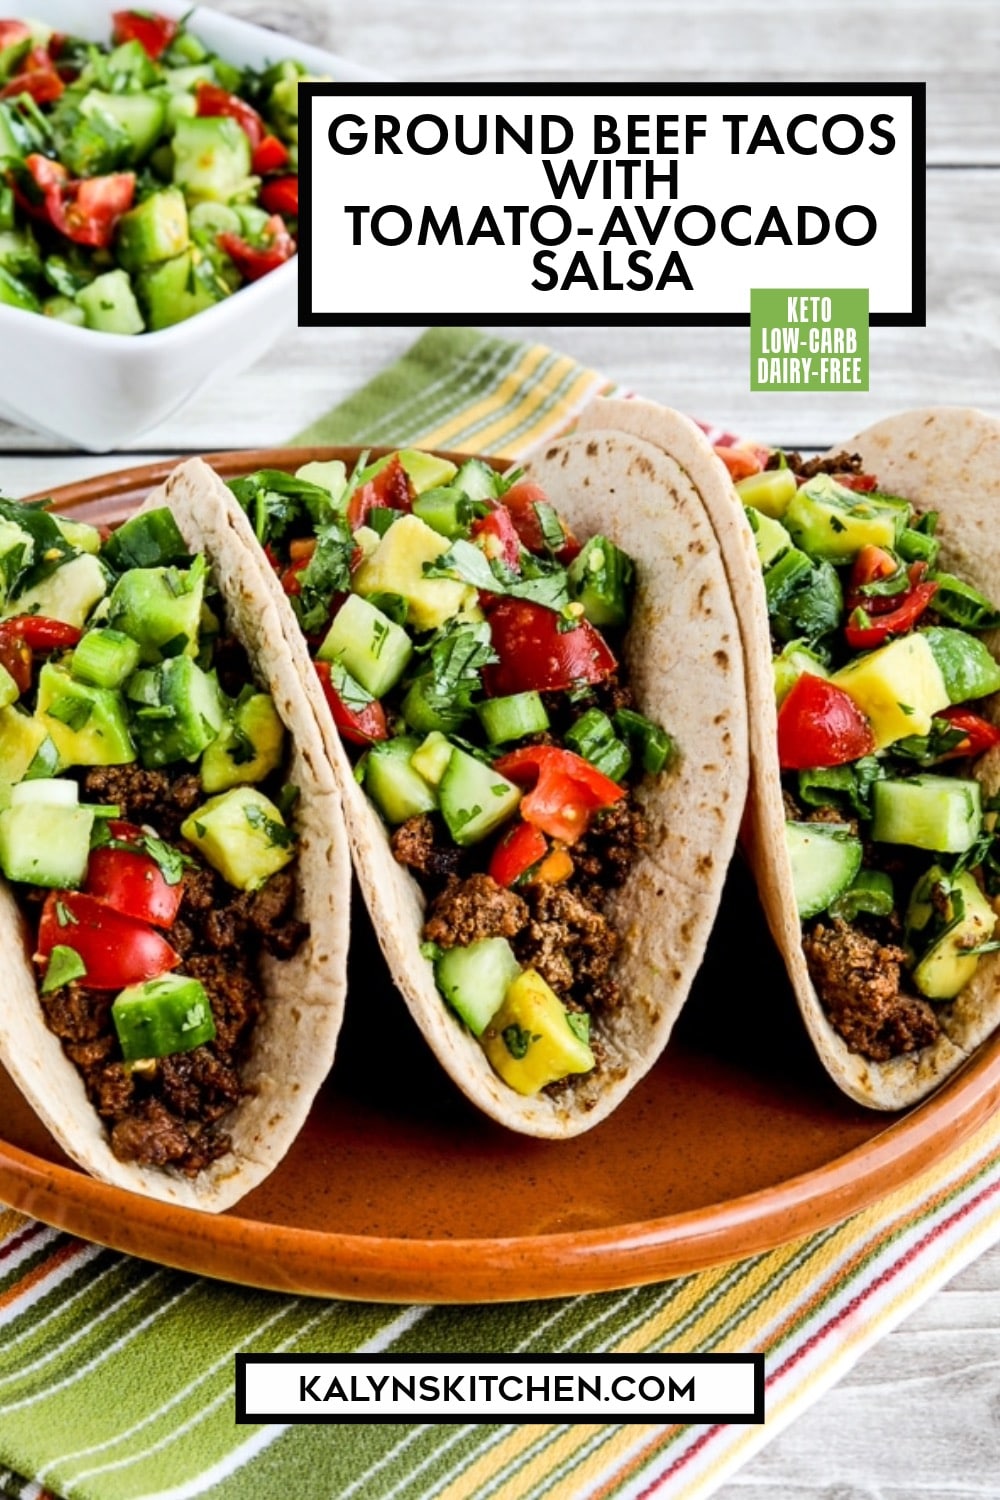 Pinterest image of Ground Beef Tacos with Tomato-Avocado Salsa